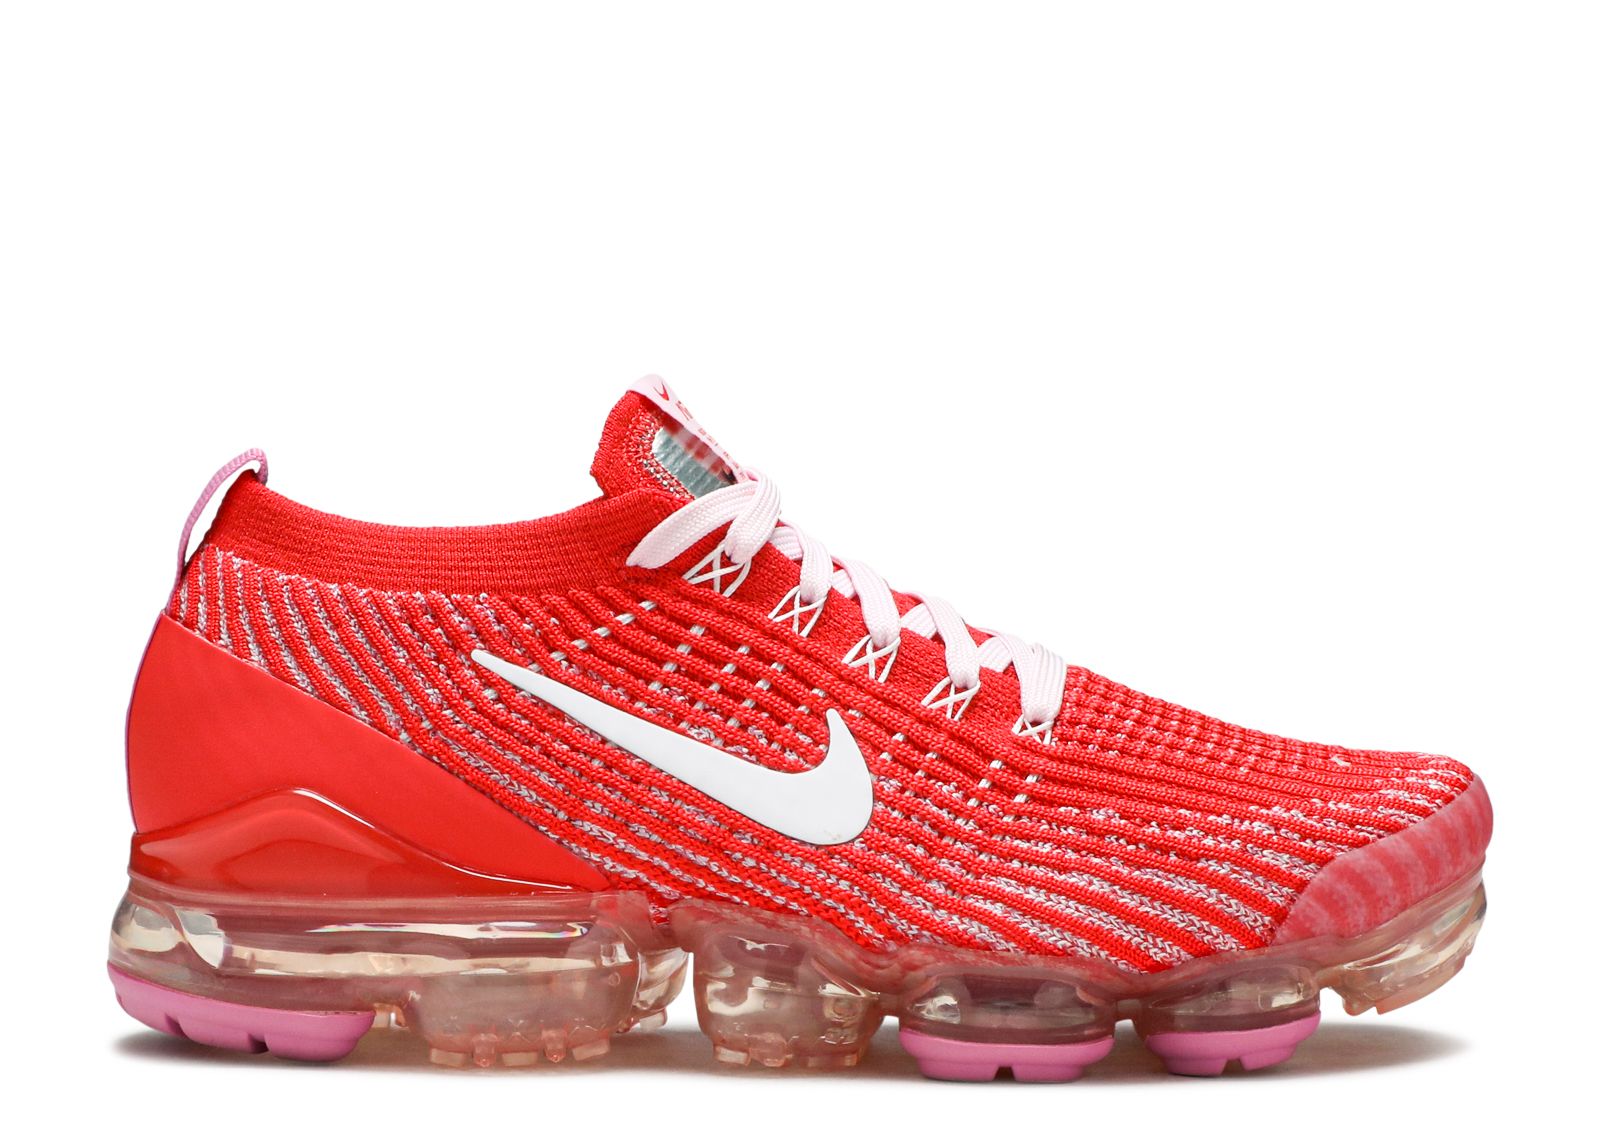 vapormax flyknit white and red